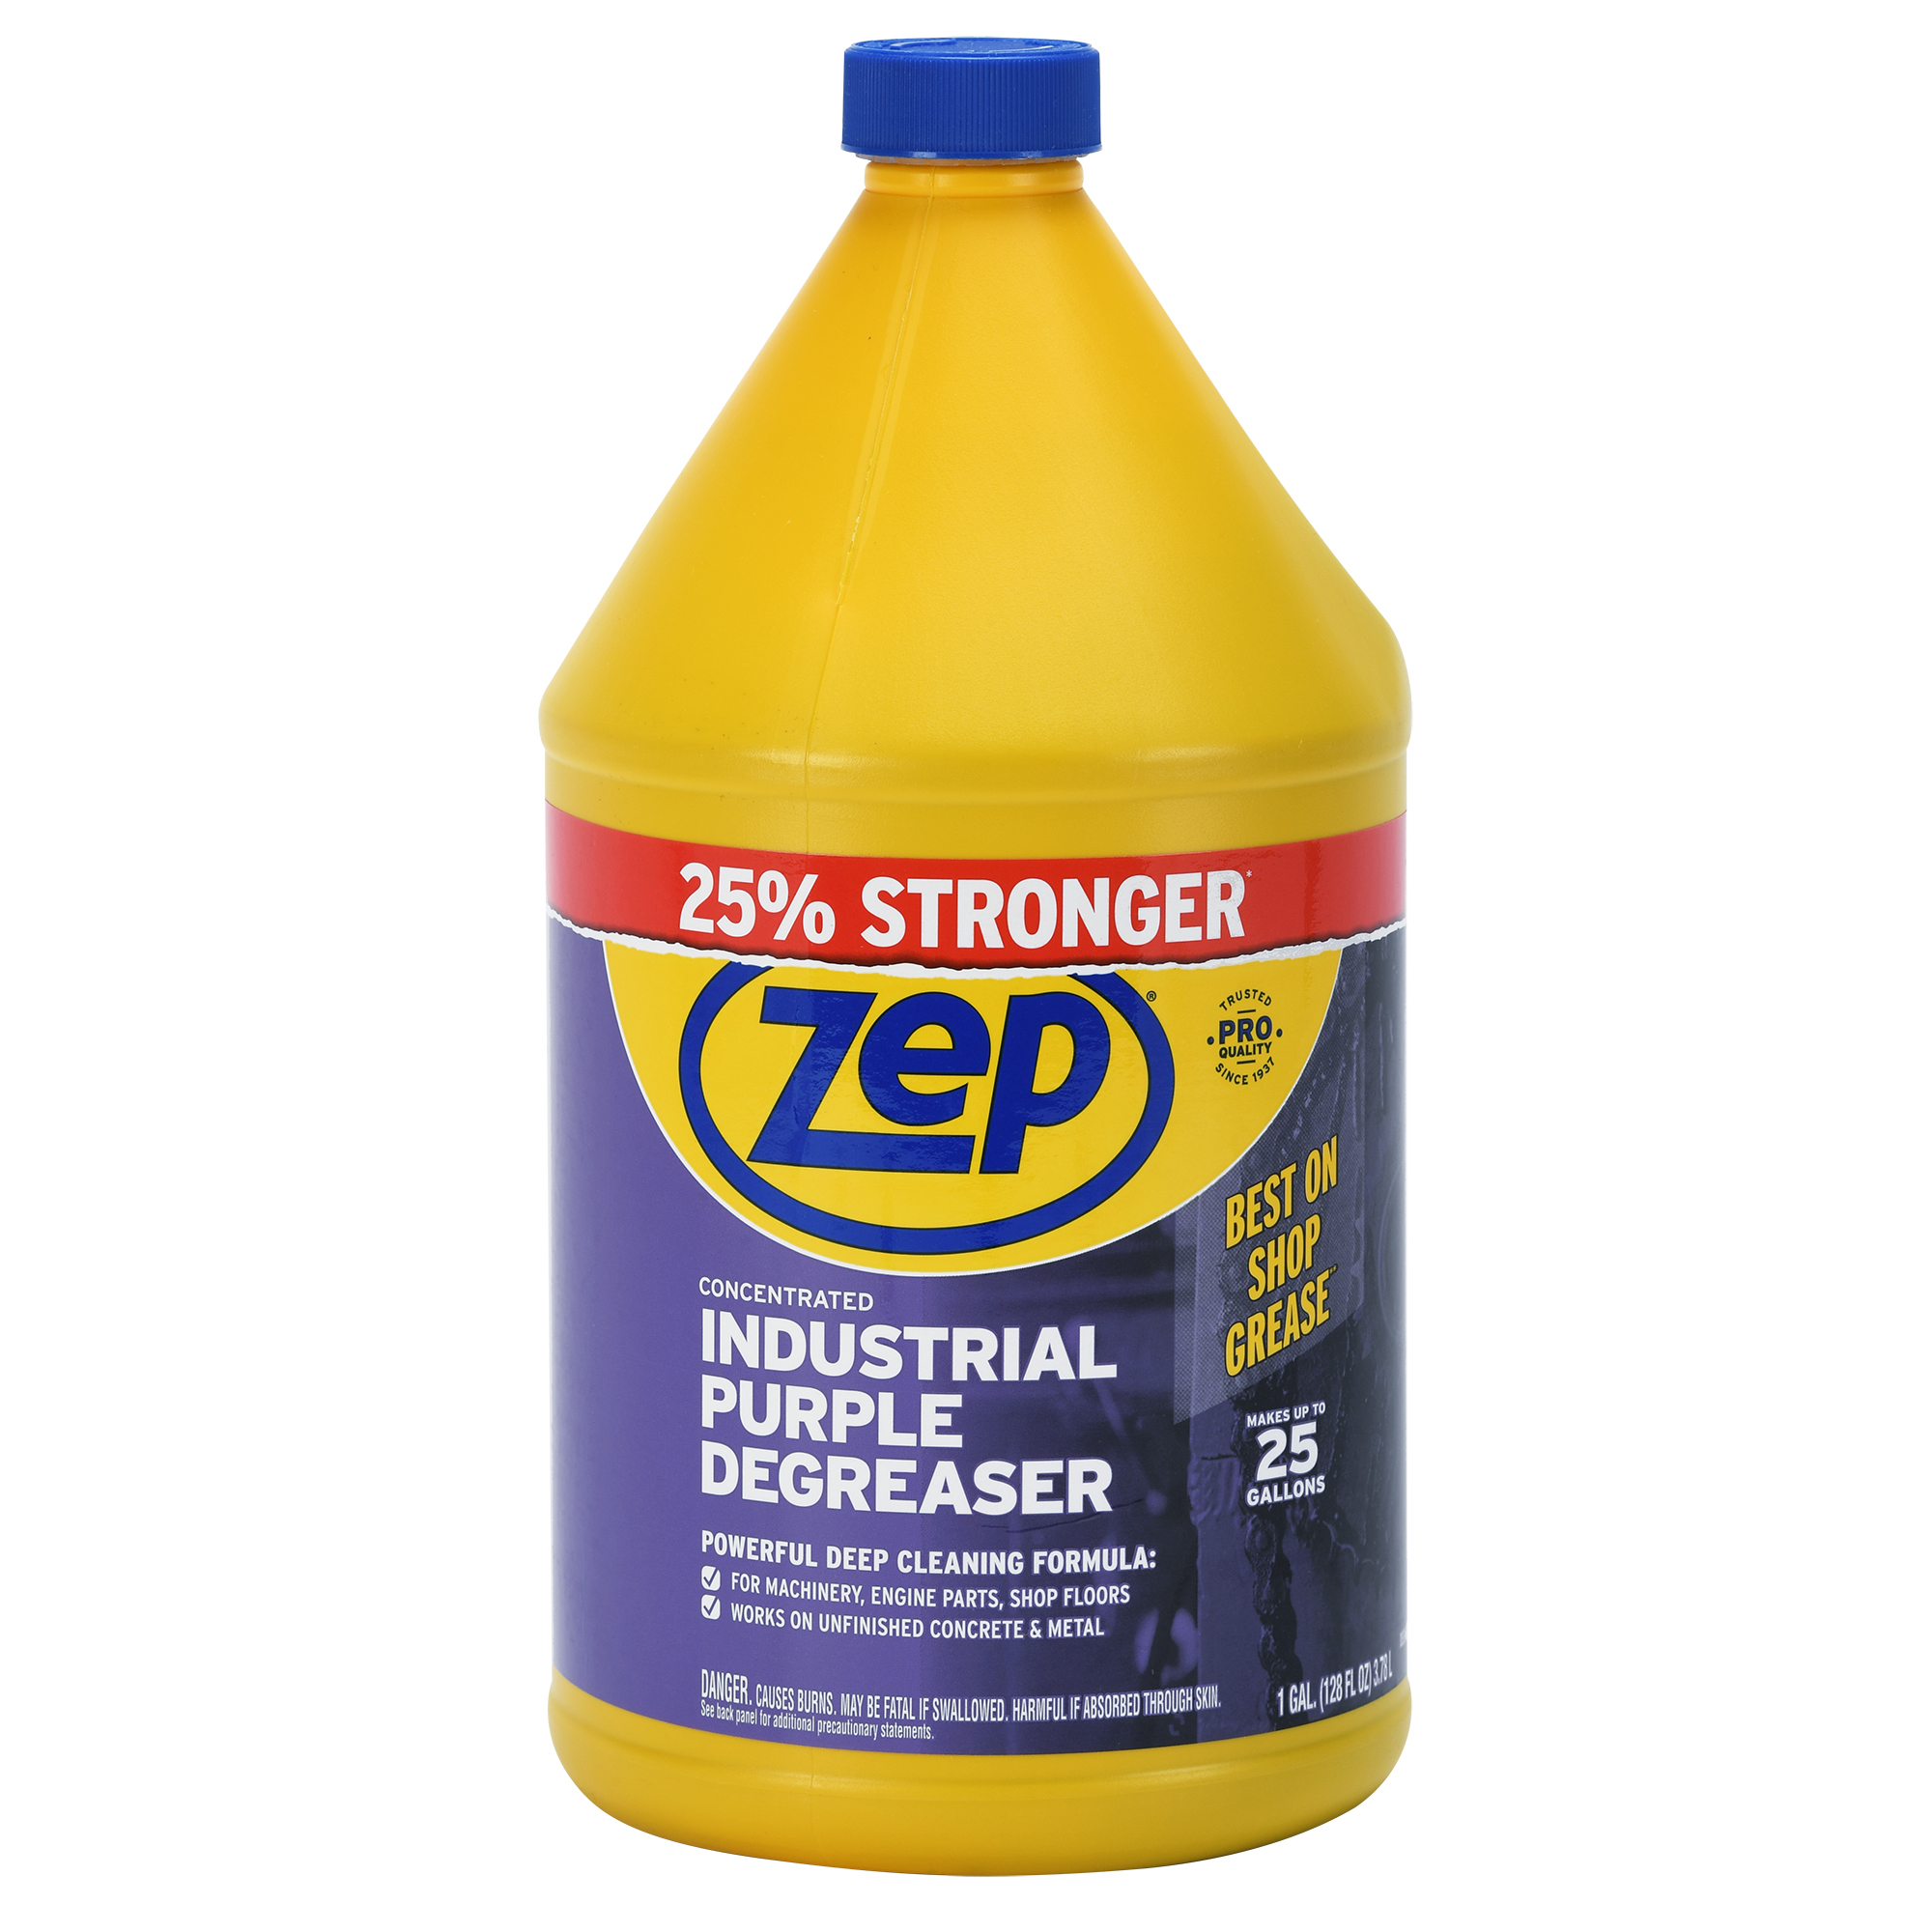 Fast 505 Cleaner and Degreaser 32 oz. 2 Pack by Zep